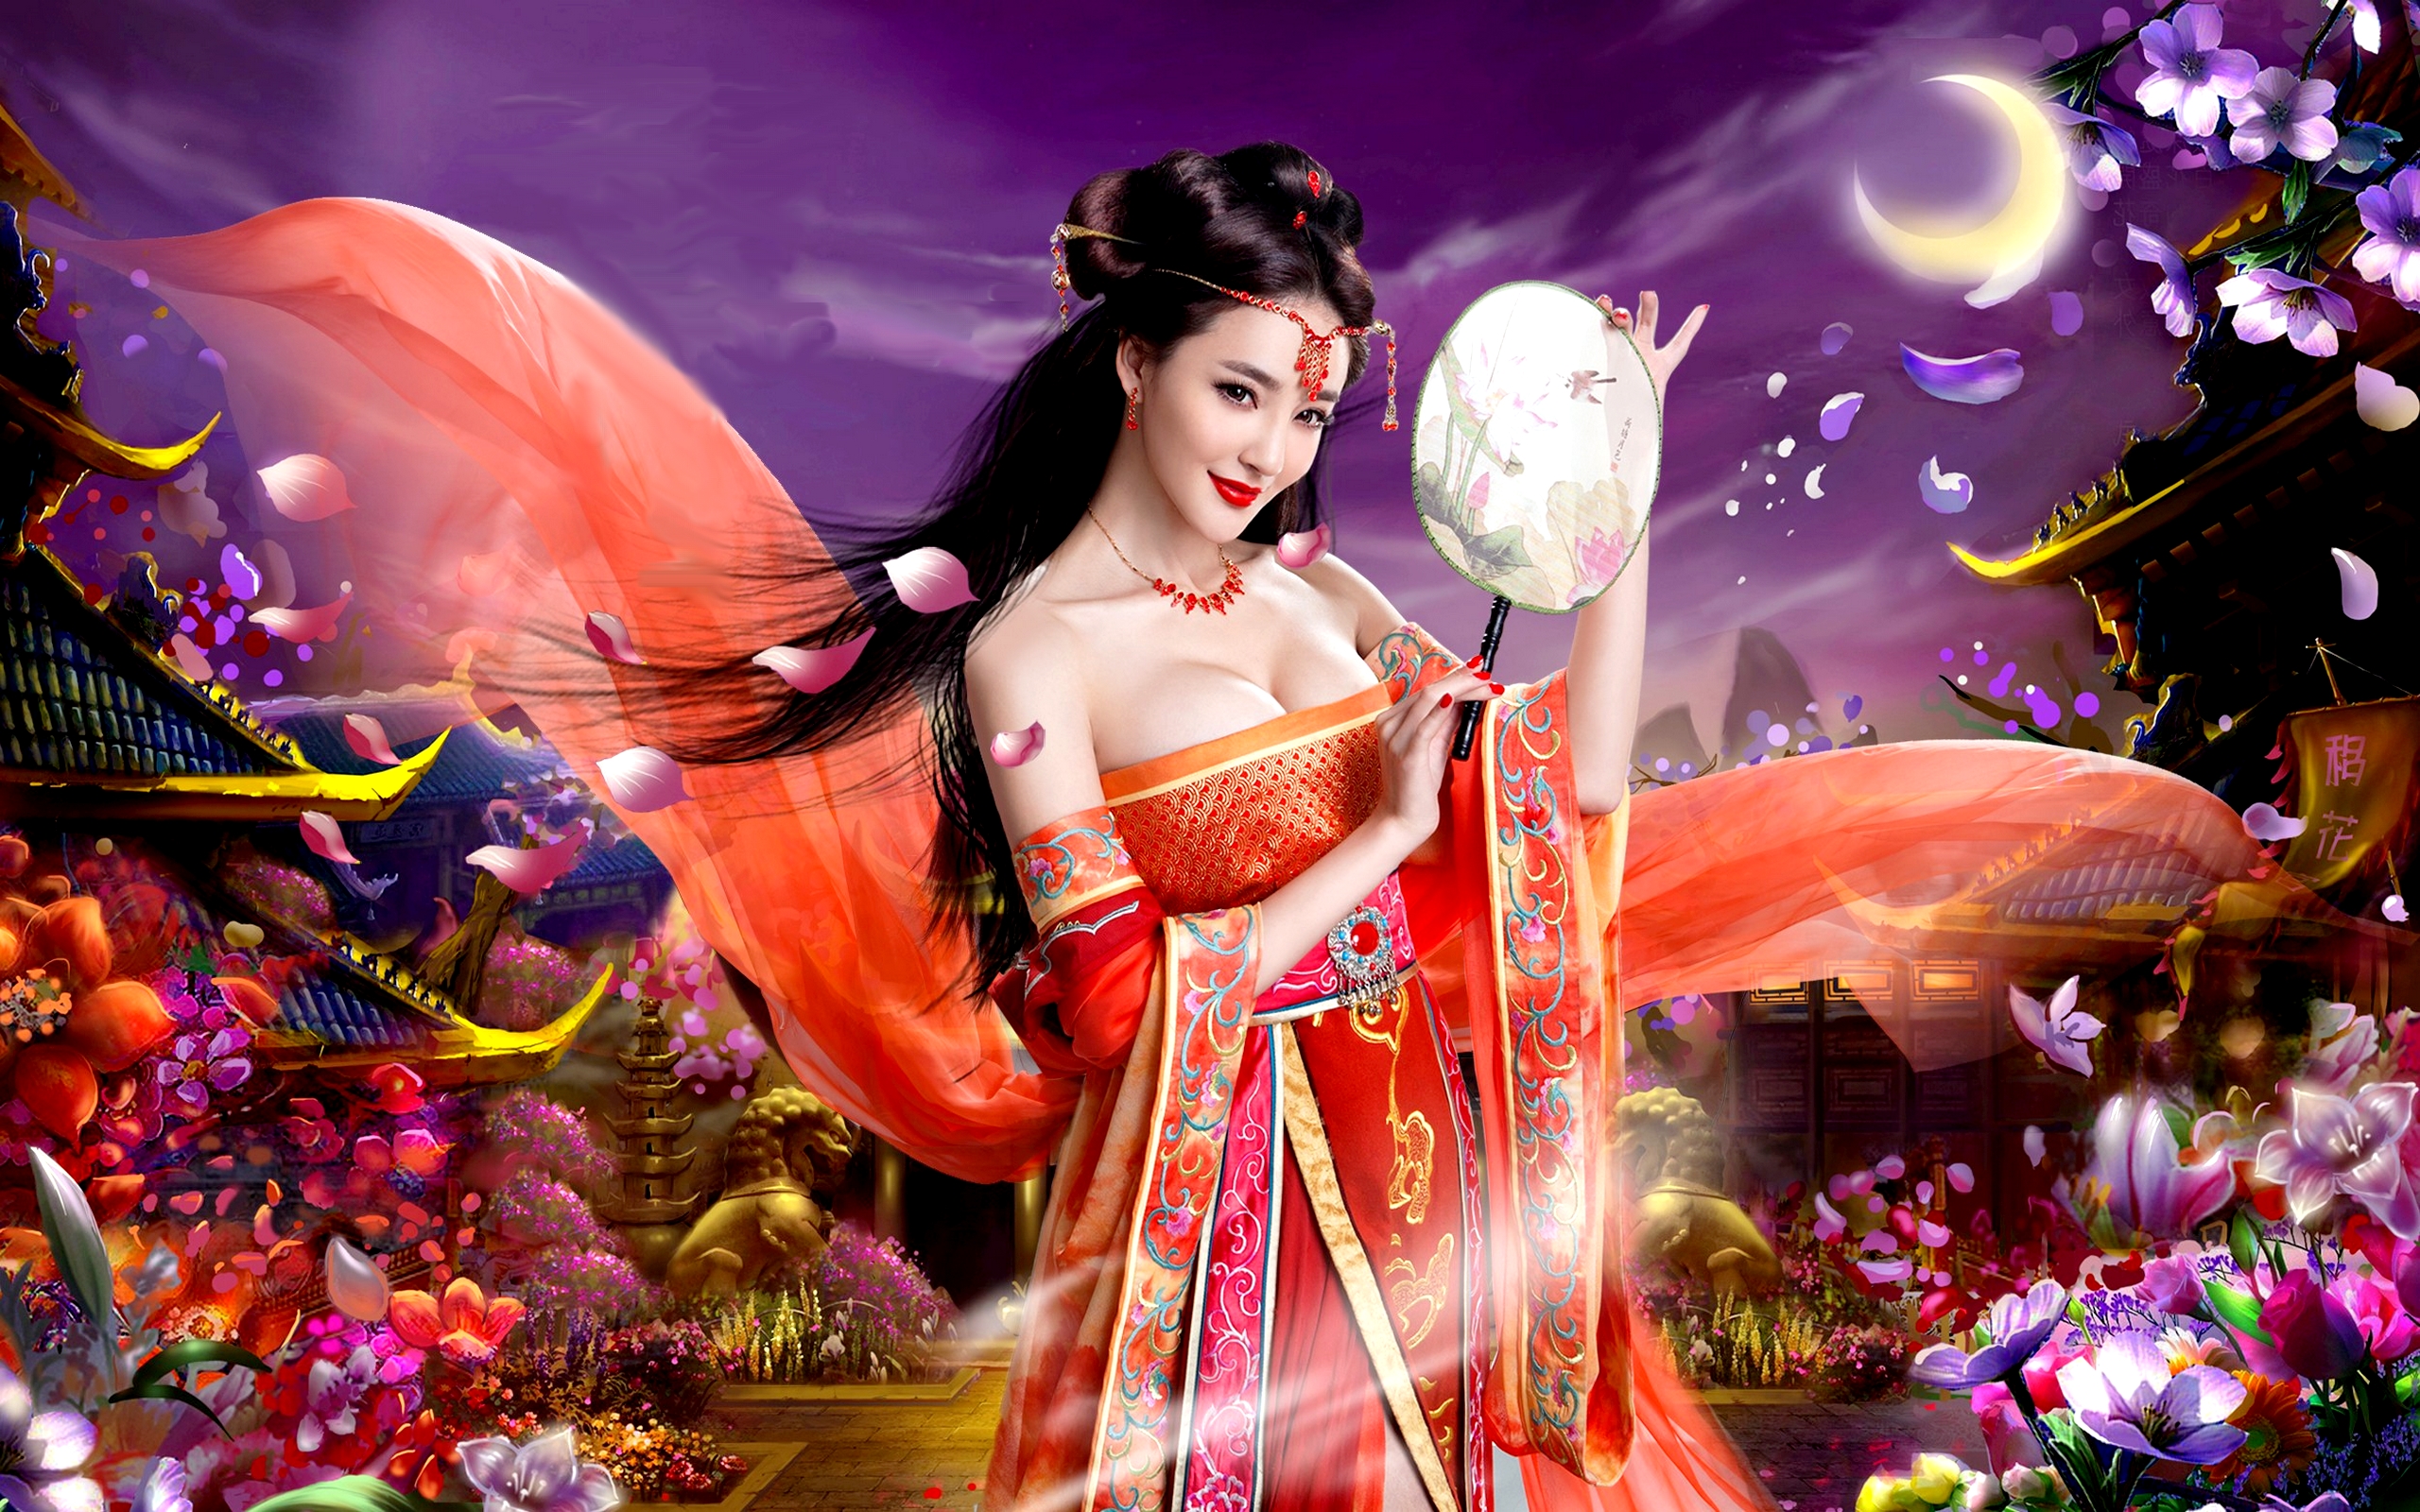 30 goddess hd wallpapers background images wallpaper abyss 30 goddess hd wallpapers background